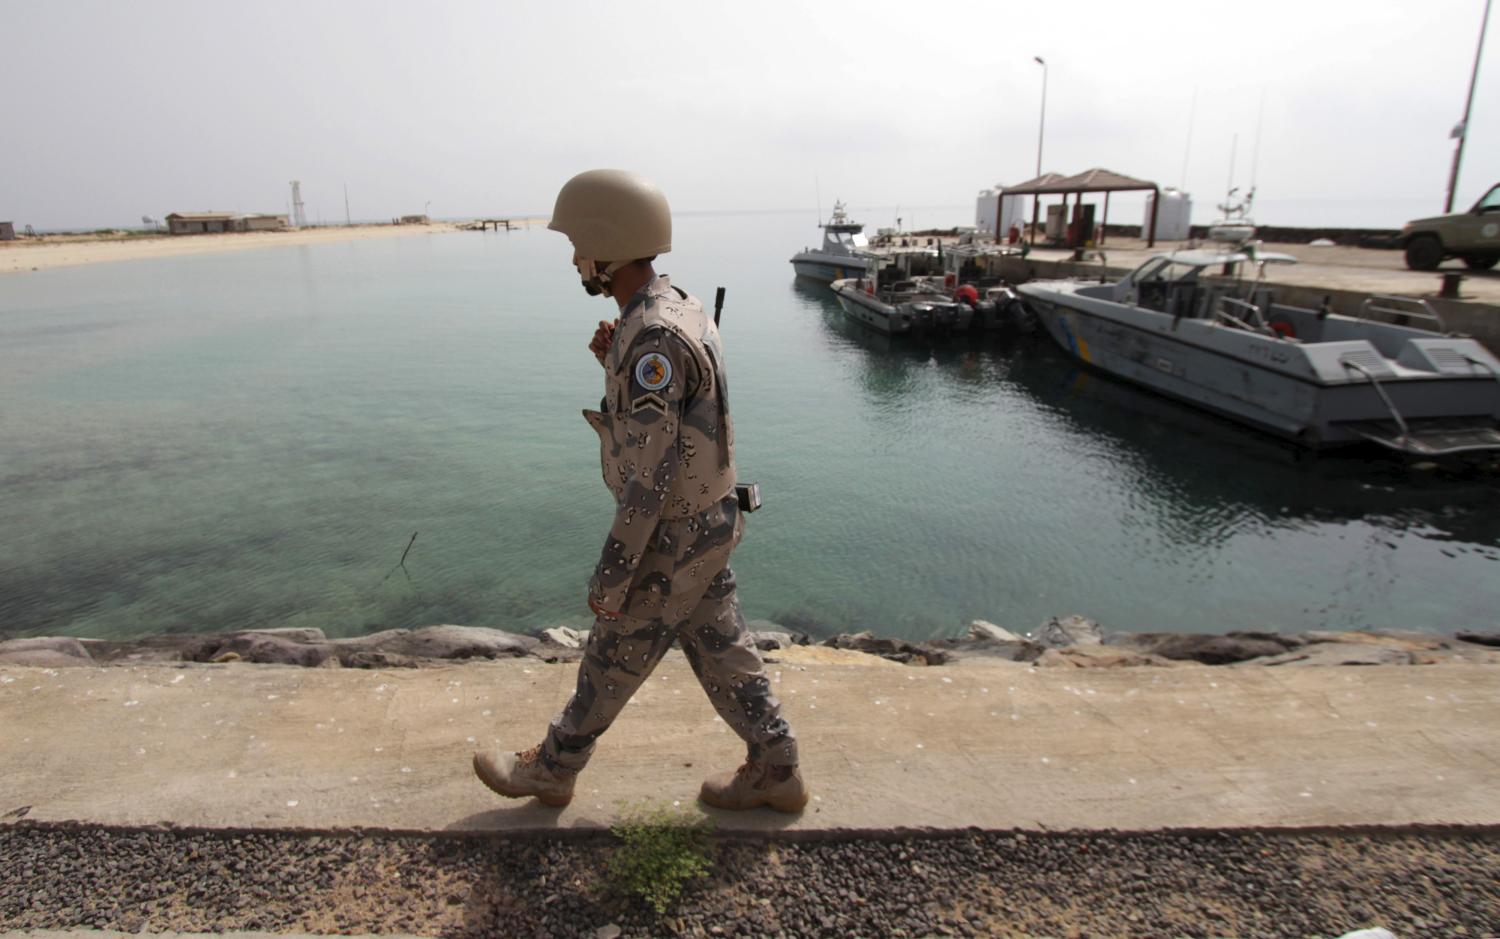 A Saudi border guard patrols Saudi Arabia's maritime border with Yemen along a beach on the Red Sea, near Jizan April 8, 2015. Iran sent two warships to the Gulf of Aden on Wednesday, state media reported, establishing a military presence off the coast of Yemen where Saudi Arabia is leading a bombing campaign to oust the Iran-allied Houthi movement. REUTERS/Faisal Al Nasser - GF10000052482